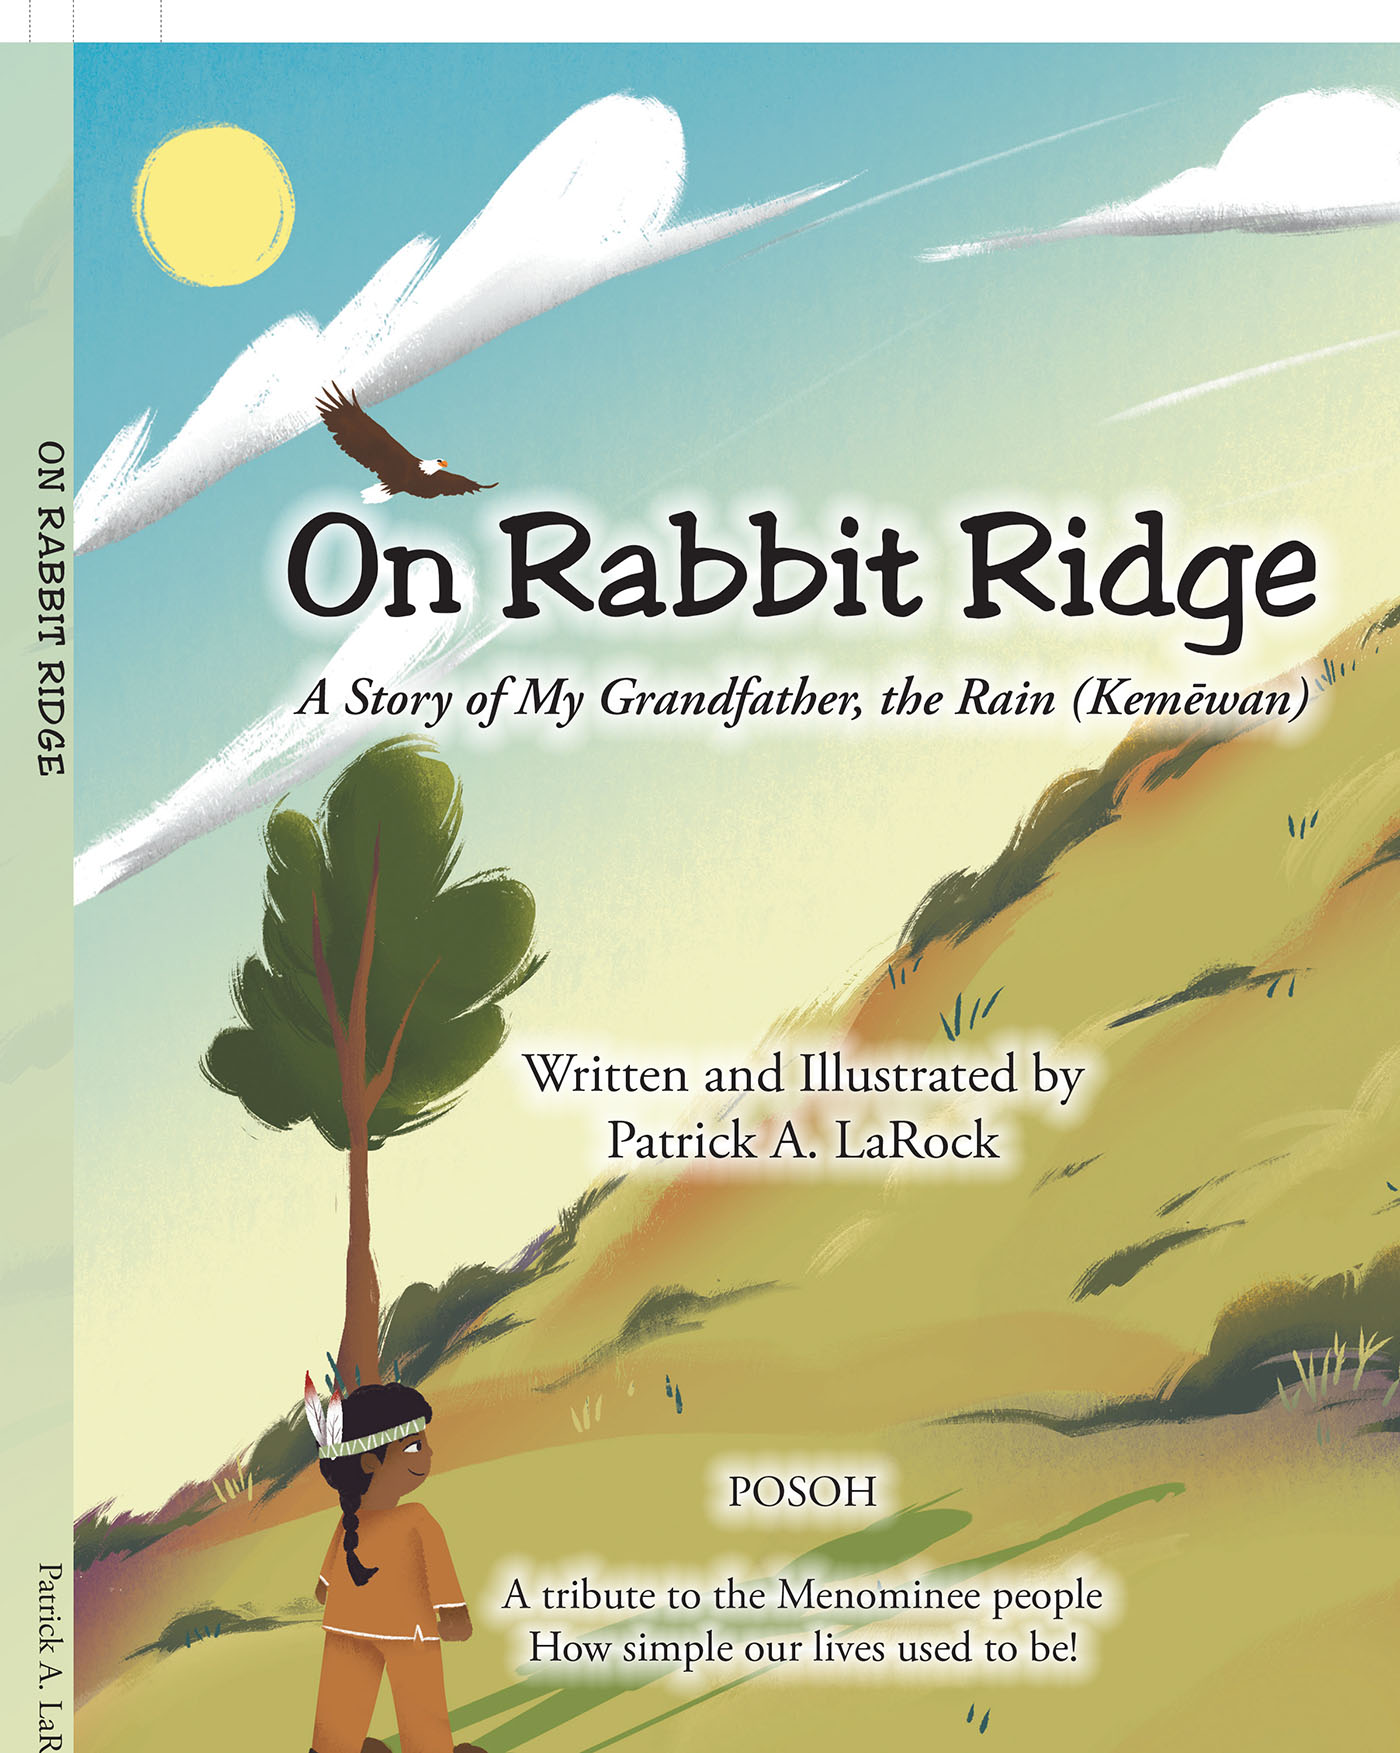 Author Patrick A. LaRock’s New Book, “On Rabbit Ridge: A Story of My Grandfather, the Rain (Kemēwan),” is a Vivid and Descriptive Memoir of the Author’s Childhood